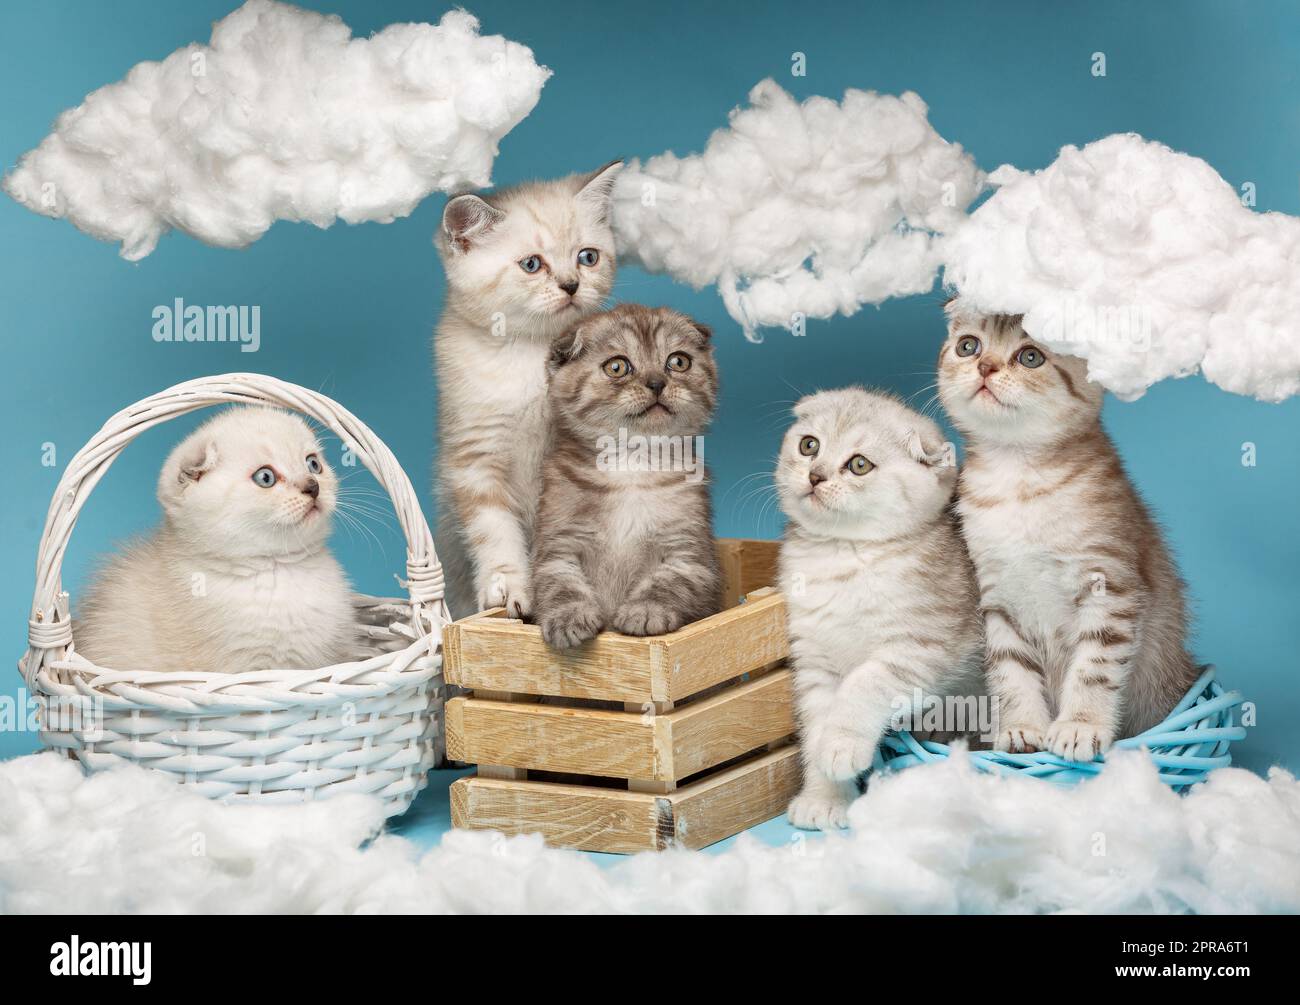 Kittens sit in a wooden box and wicker basket and look with interest at the clouds around them. Stock Photo